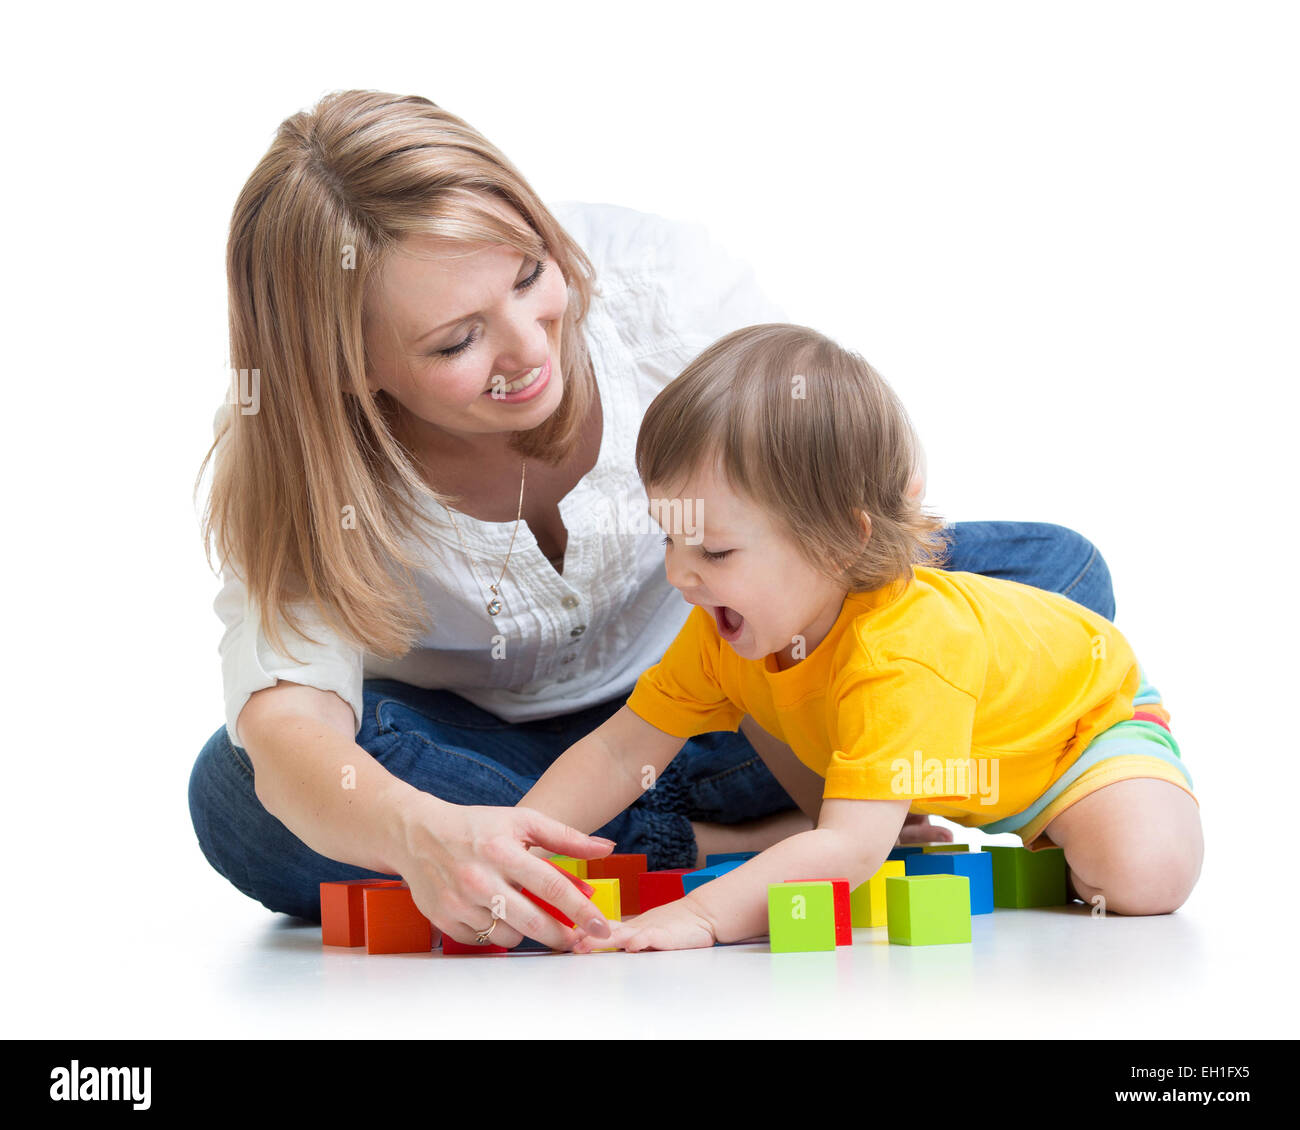 mother and baby playing and having fun Stock Photo